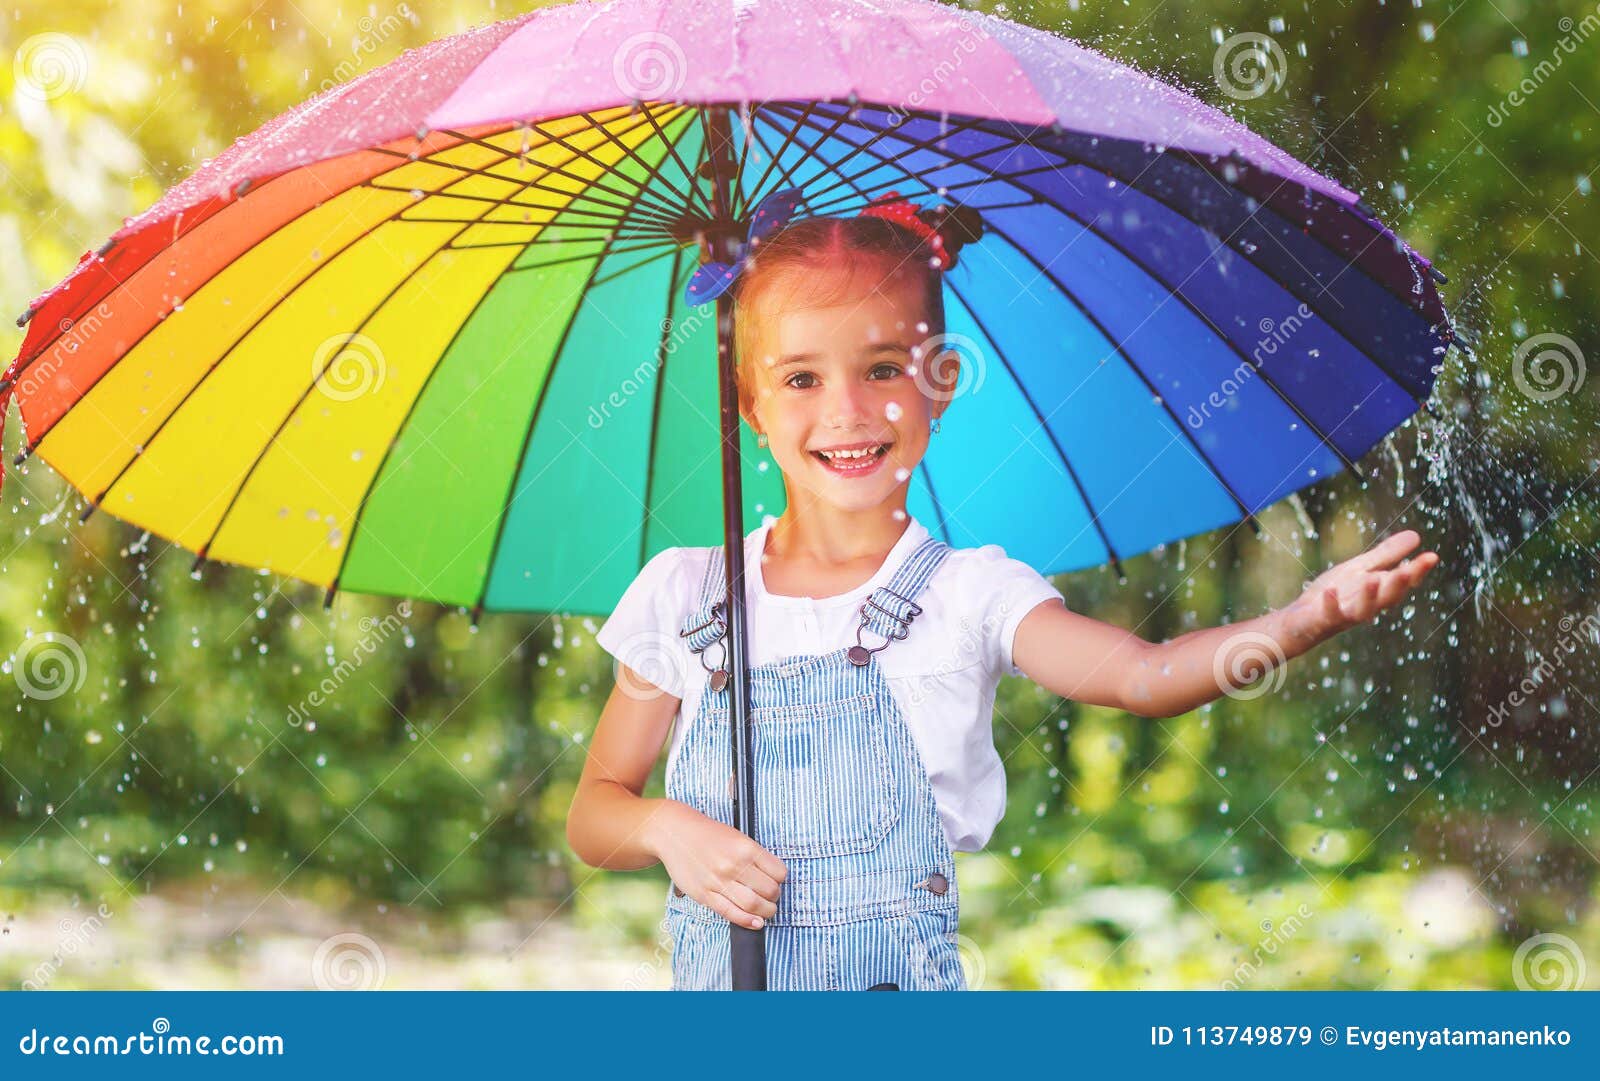 6,849,950 Happy Girl Stock Photos - Free & Royalty-Free Stock Photos from  Dreamstime